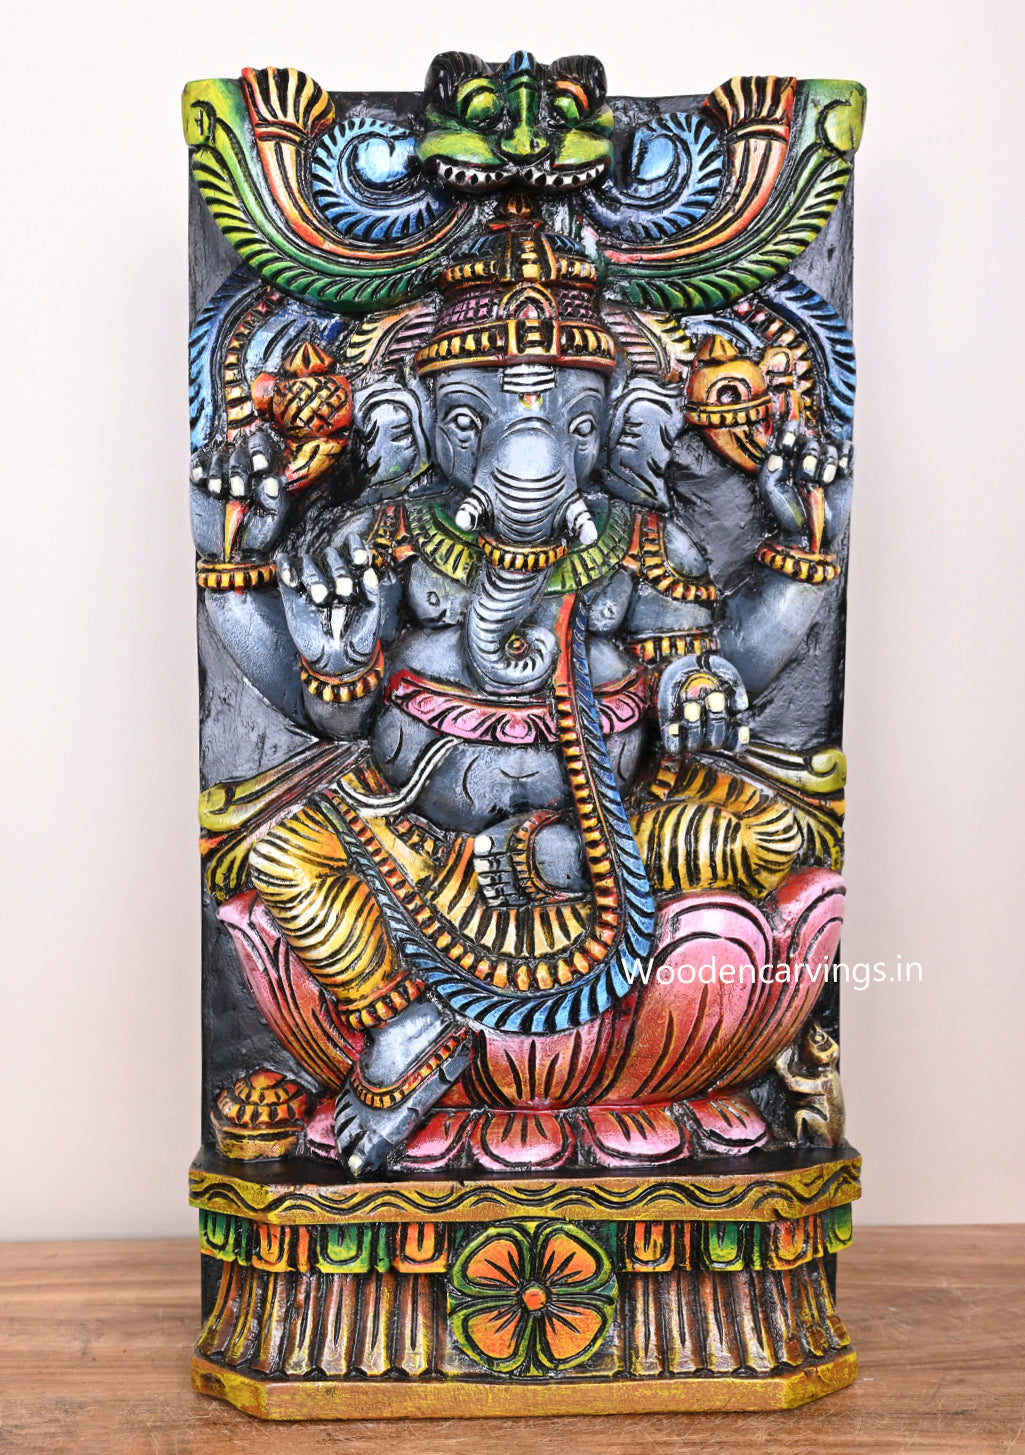 Remover of Obstacles Vertical Lord Ganapathy Handmade Grey Colour Art Work Wall Mount Sculpture 23.5"